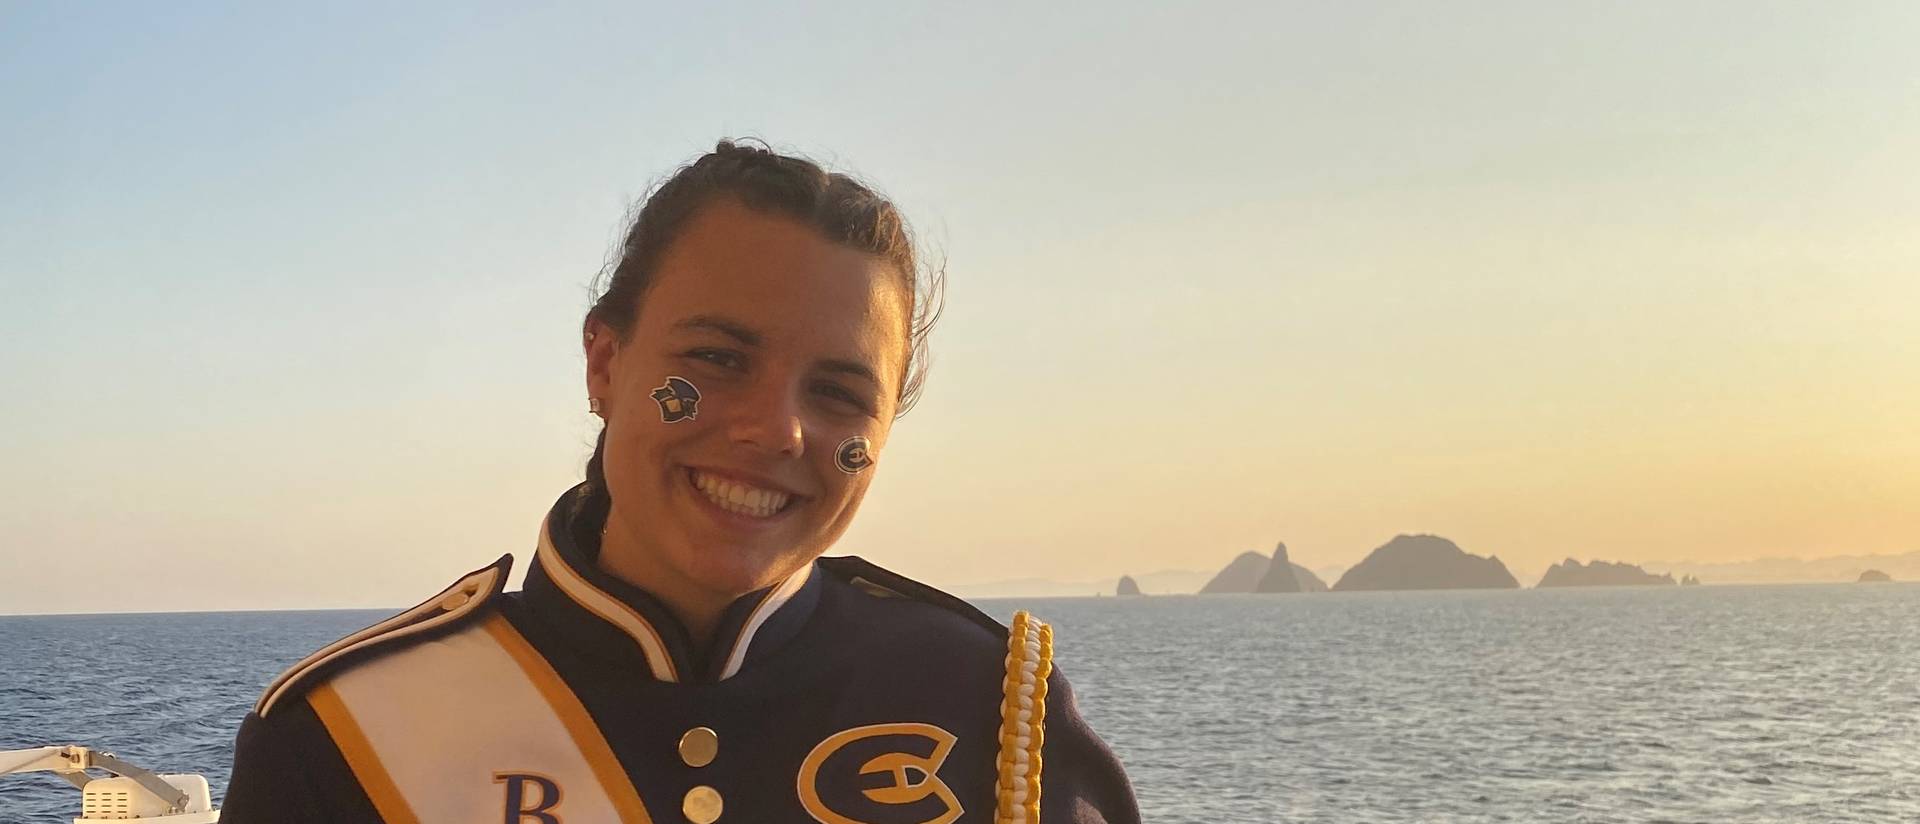 Girl in marching band uniform on the deck of a cruise ship